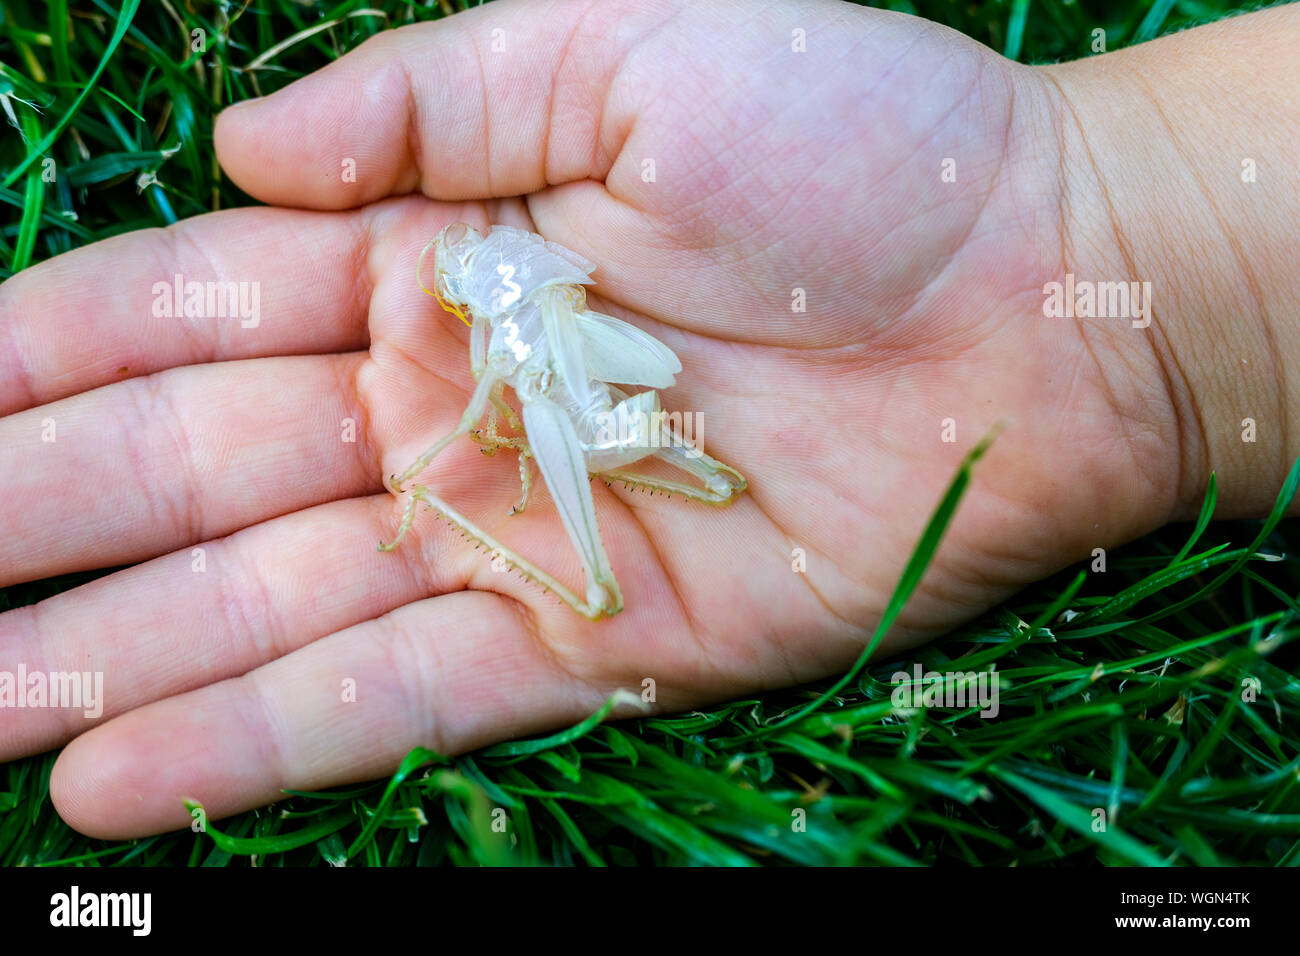 Insects like grasshoppers shed their skin in summer with a new exoskeleton. Stock Photo